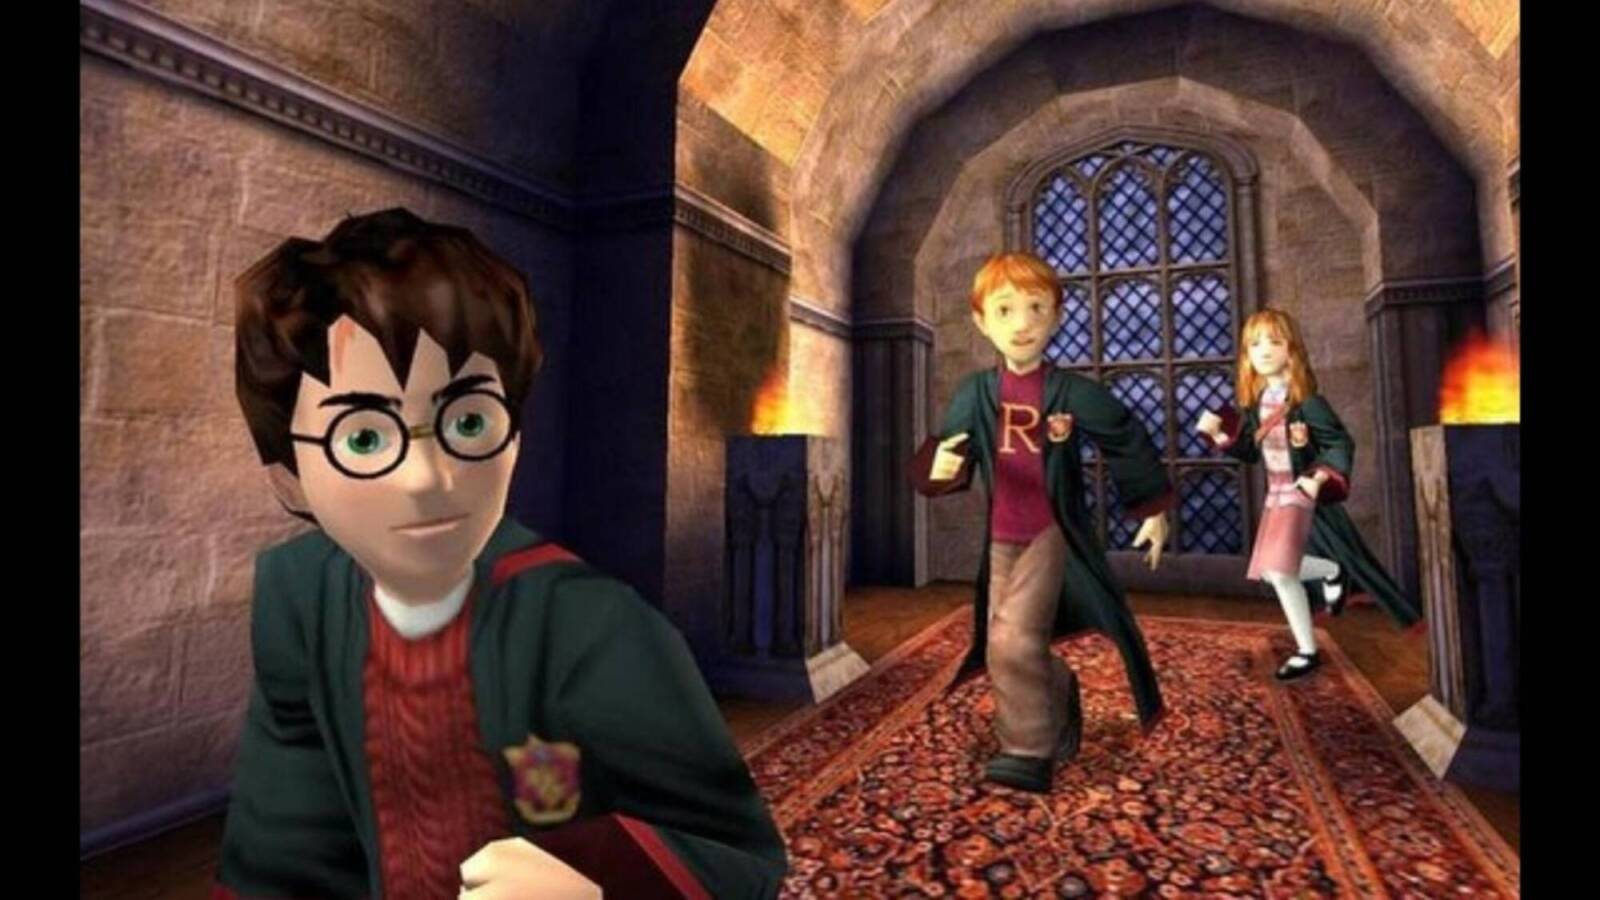 World of Harry Potter (PC, 2005) for sale online